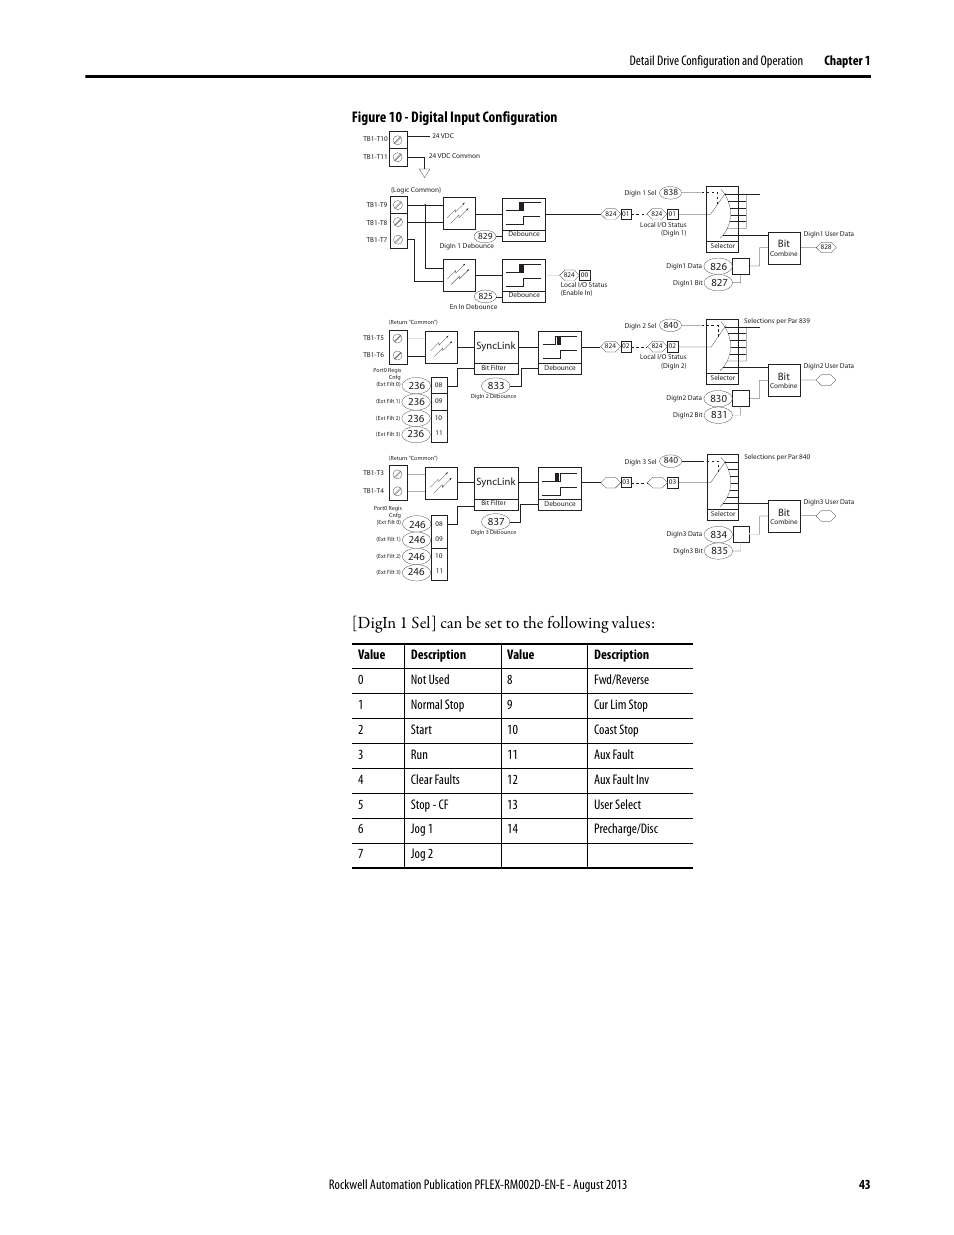 Digin 1 sel] can be set to the following values, Figure 10 - digital input configuration | Rockwell Automation 20D PowerFlex 700S with Phase I Control Reference Manual User Manual | Page 43 / 190